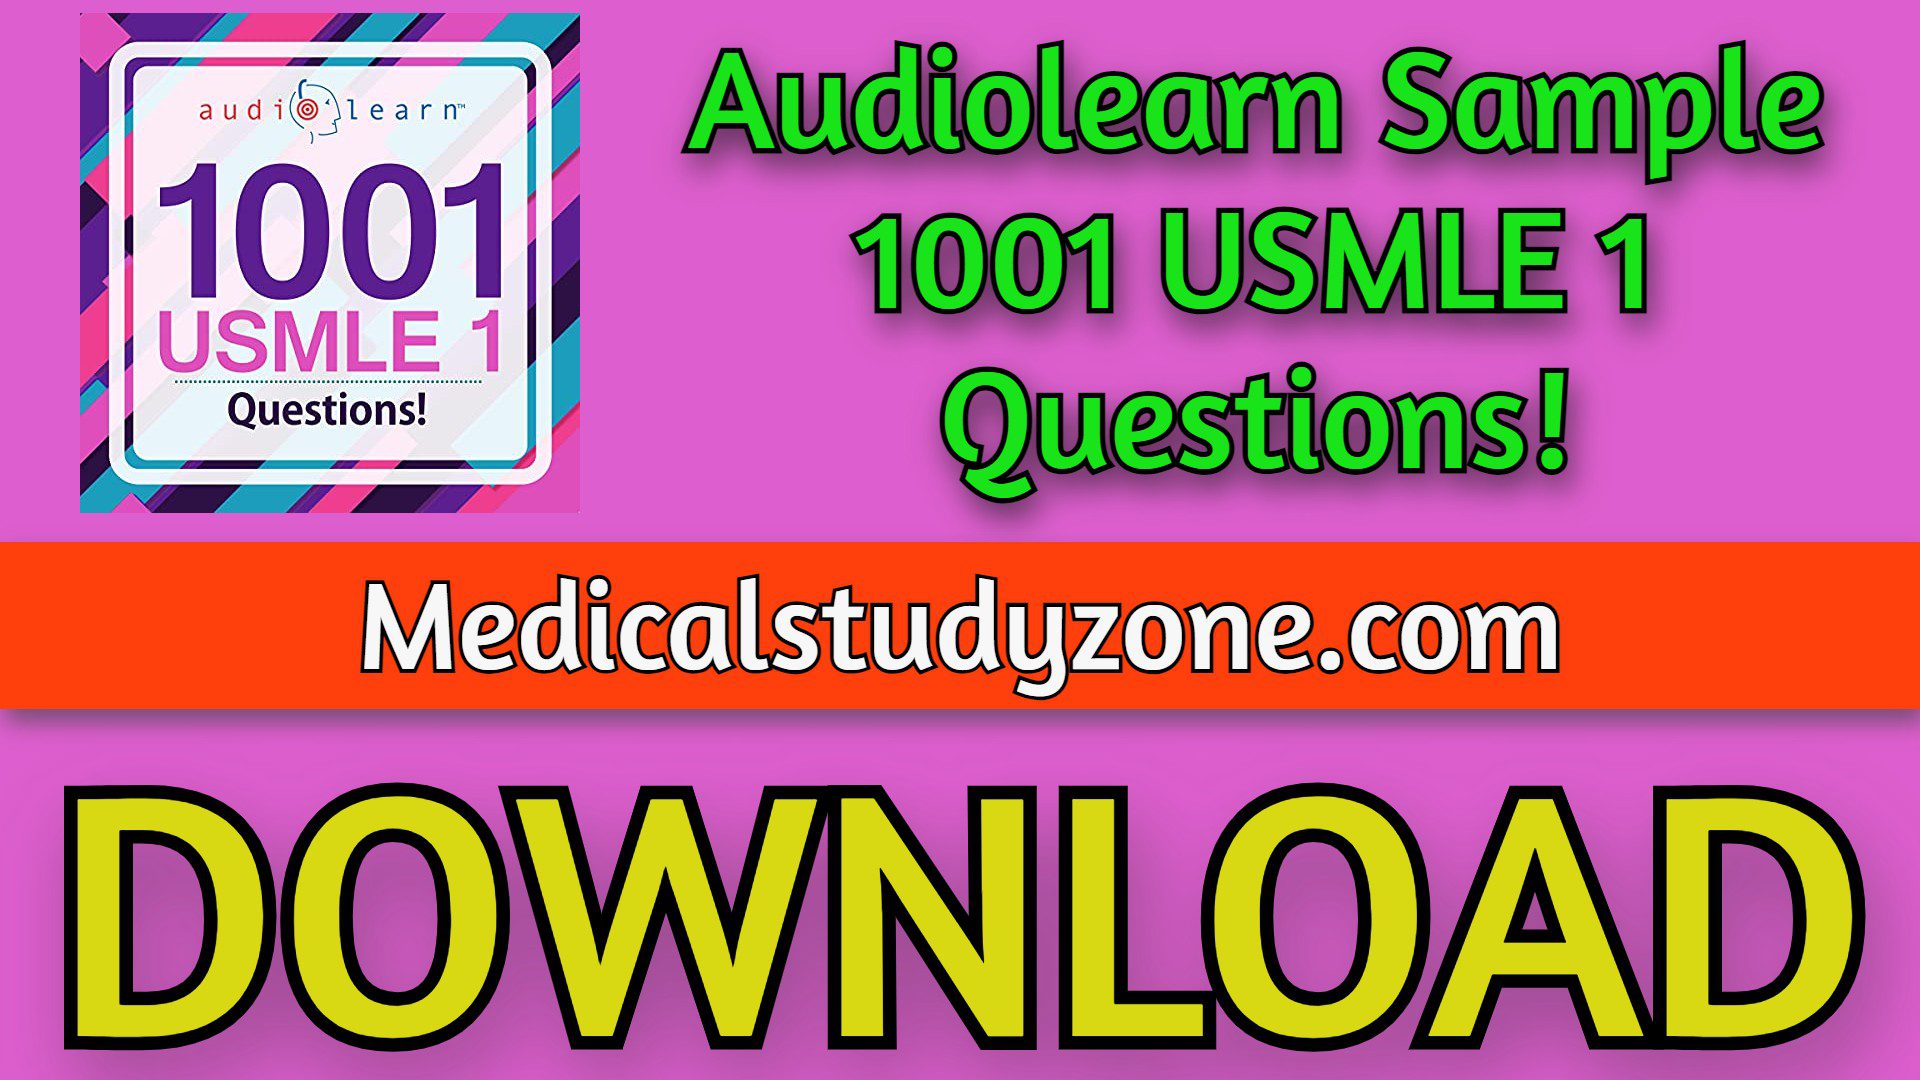 Audiolearn Sample 1001 USMLE 1 Questions! 2021 Free Download